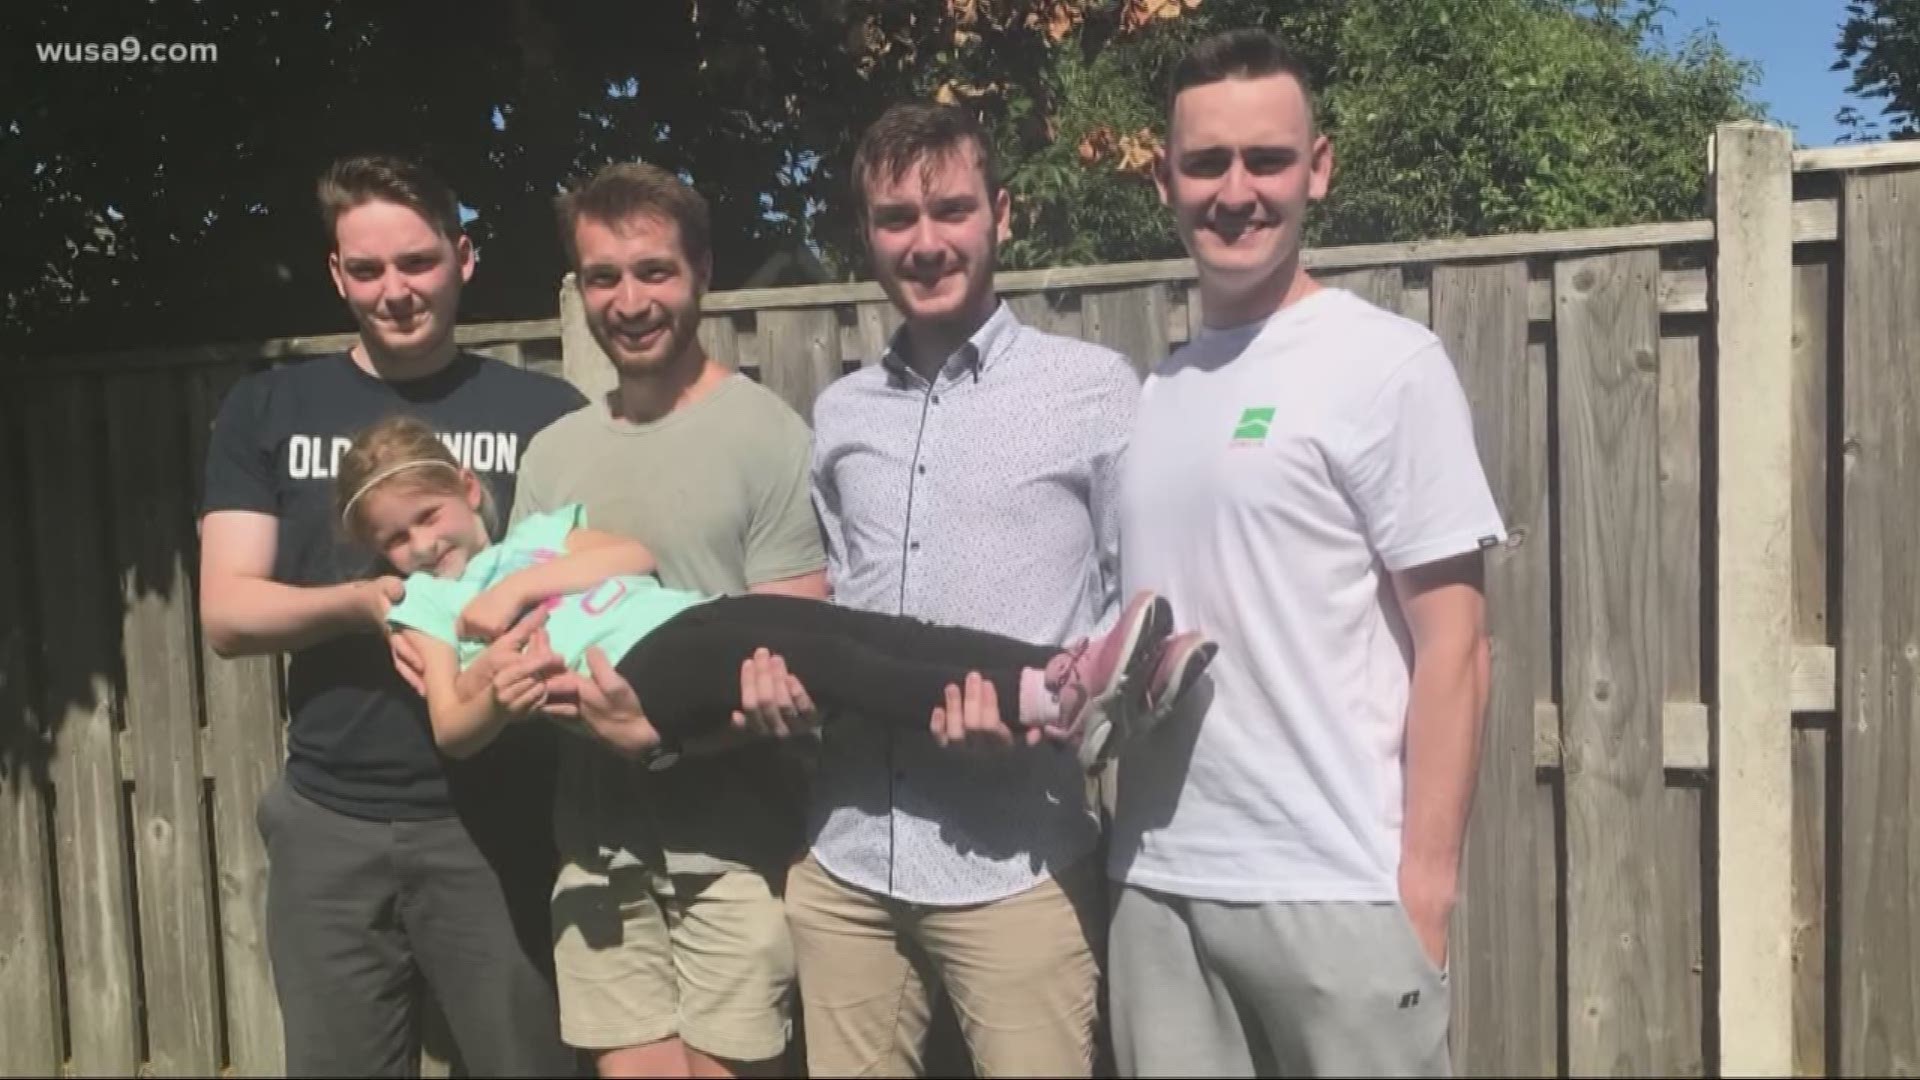 Walter Butler said he and his brothers, Declan and Eoghan Butler, as well as his brother-in-law, Alex Thomson went to Postnarmack Beach near Dublin for a day of relaxation. Within minutes, they heard the screams of a 6-year-old girl who was drowning. The brothers did not hesitate to jump in and save her.